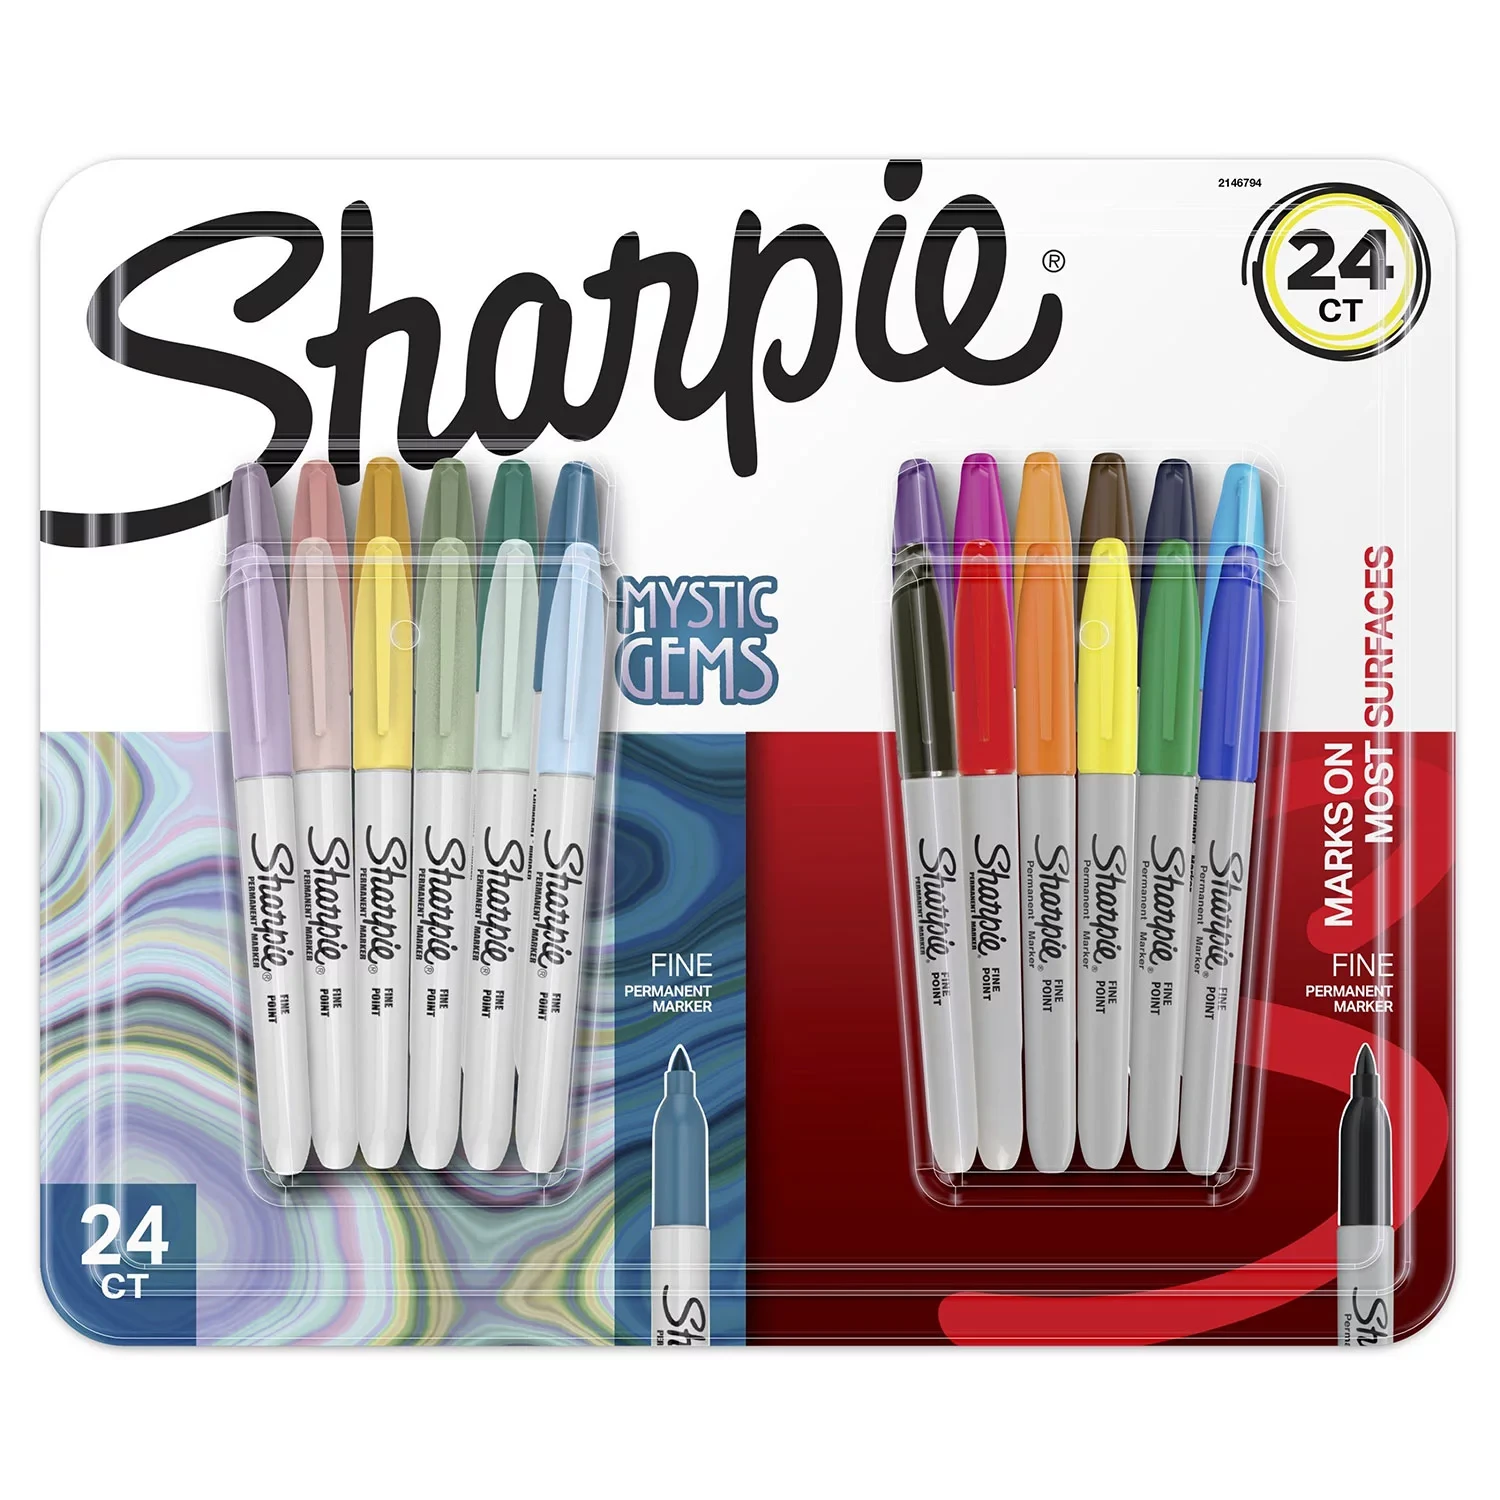 Sharpie Permanent Marker, Fine, Assorted Colors , 24 Count, Pack Of 3